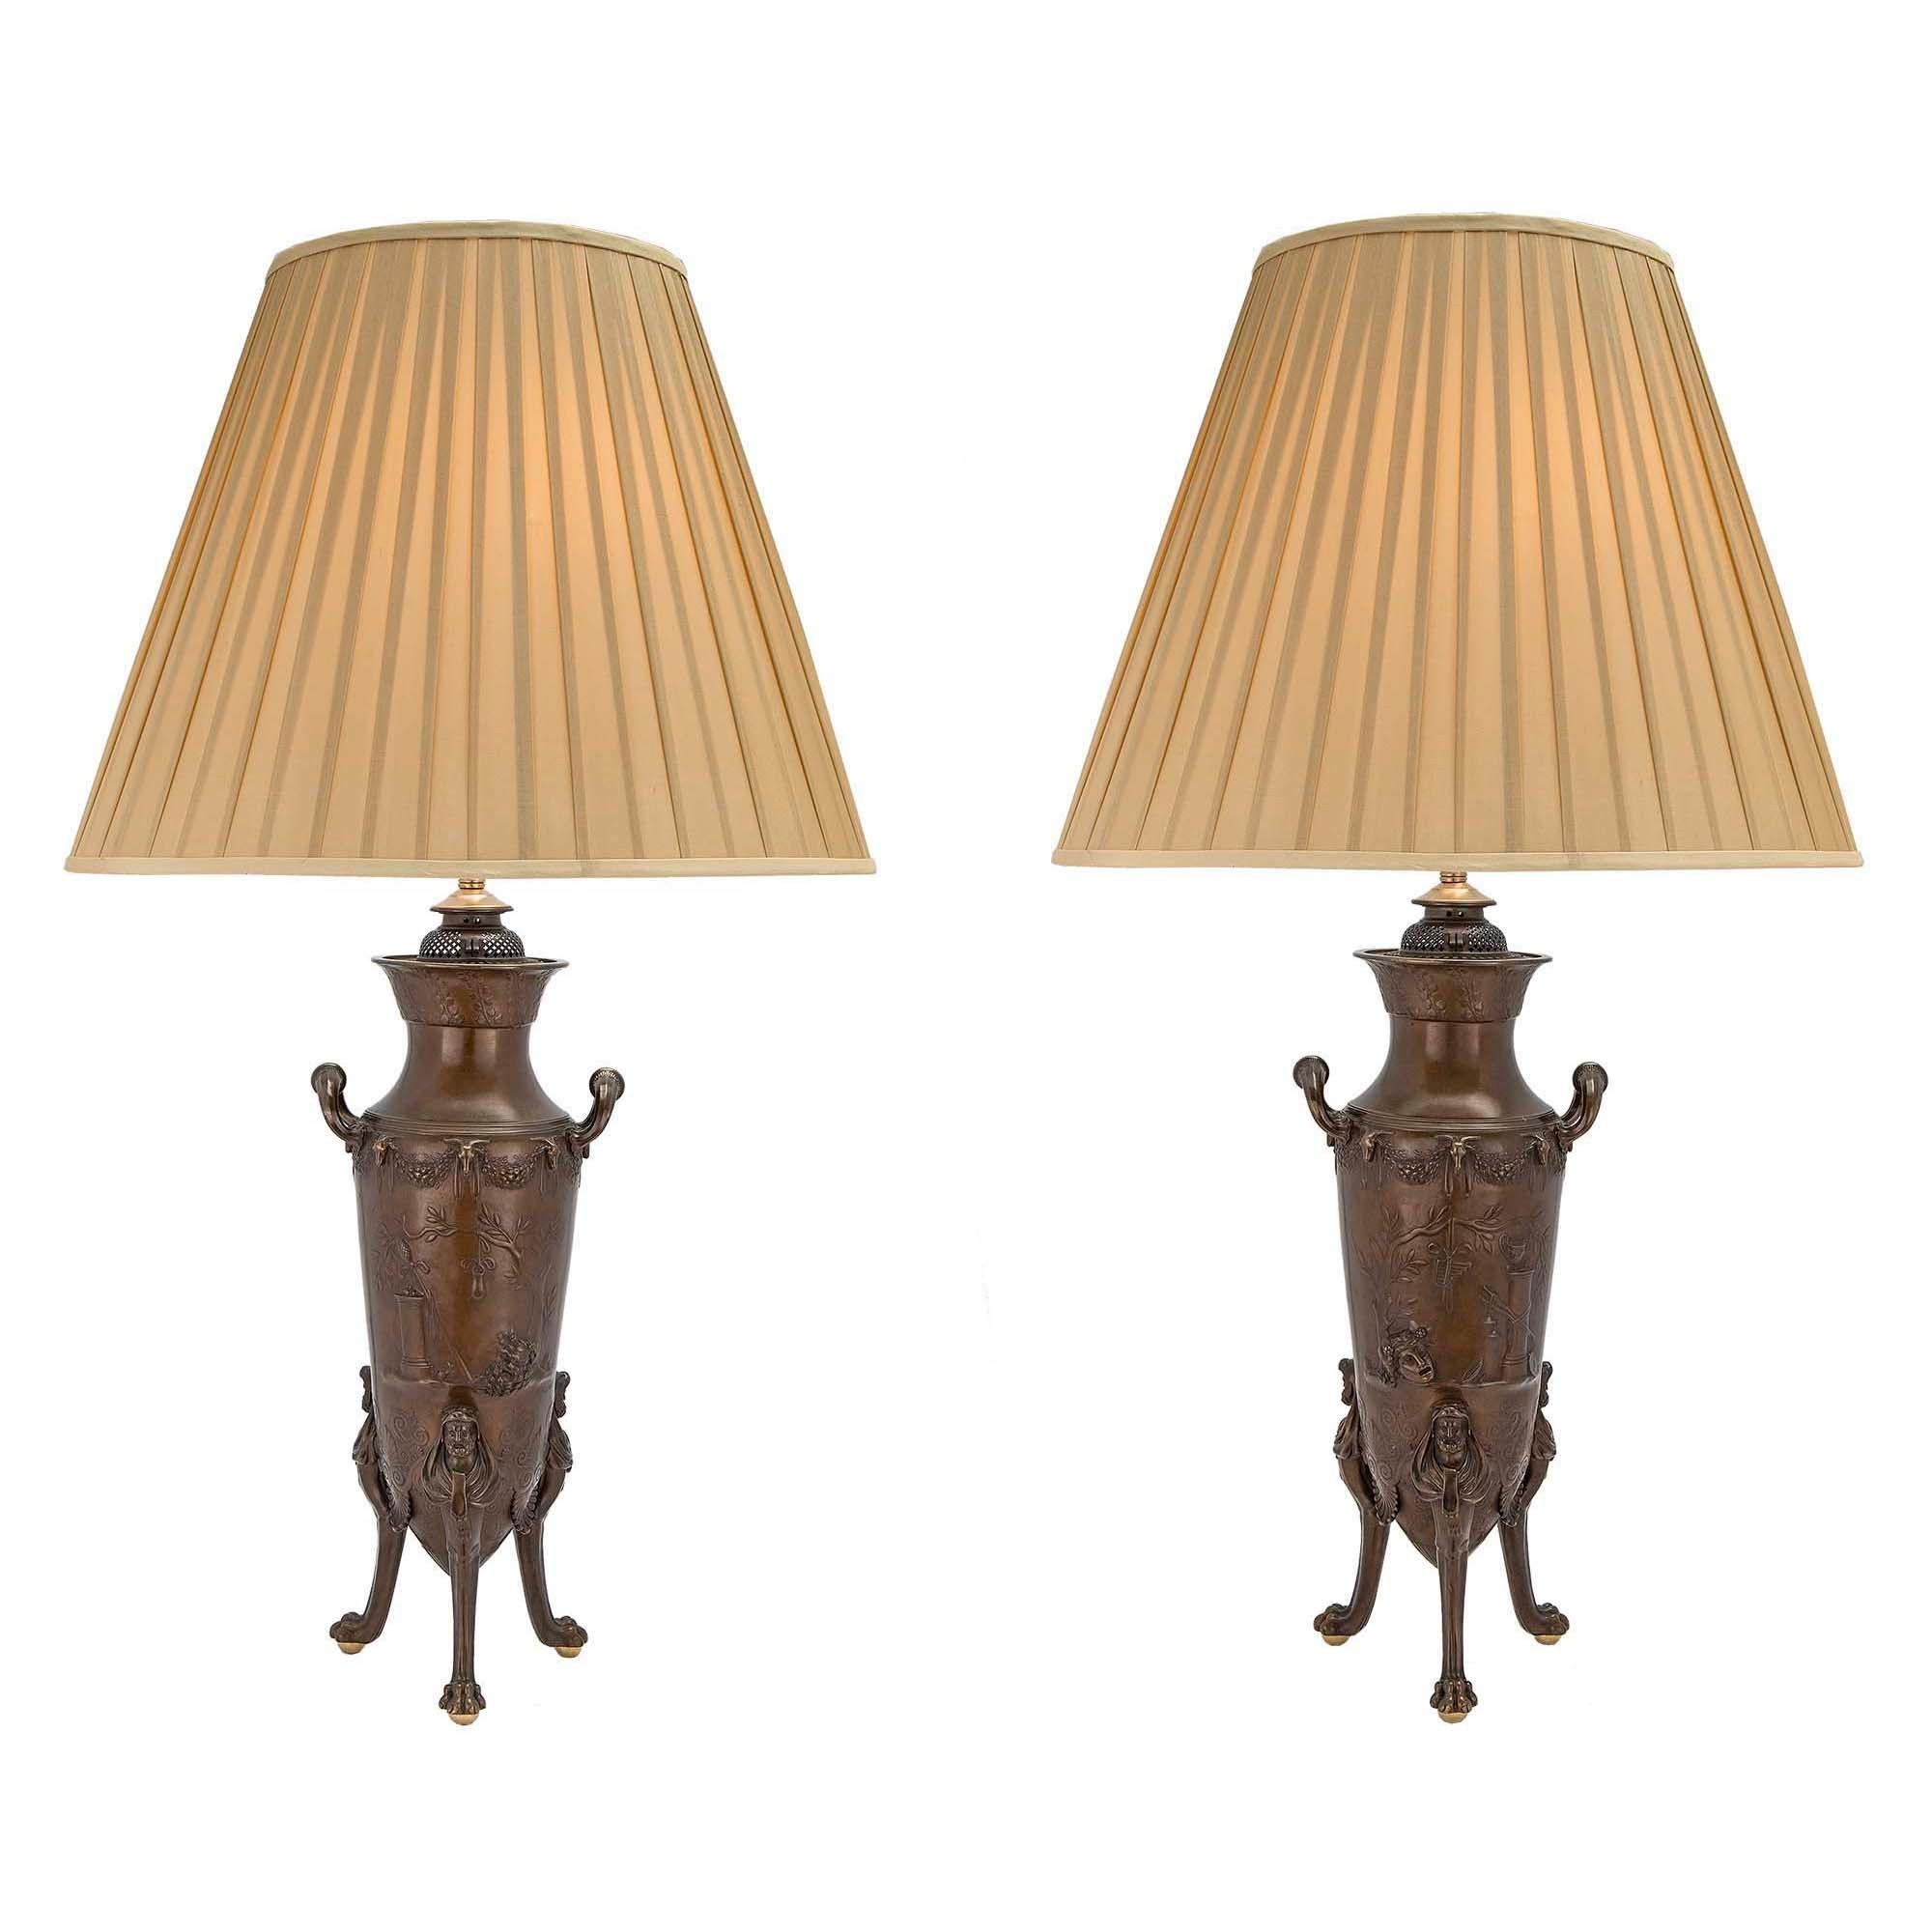 A handsome and unusually larger scale true pair of French 19th century Renaissance st. patinated bronze lamps signed F. Levillain & F. Barbedienne. Each lamp is raised by a tripod with fine paws holding ormolu ball feet and Hercules wearing lion